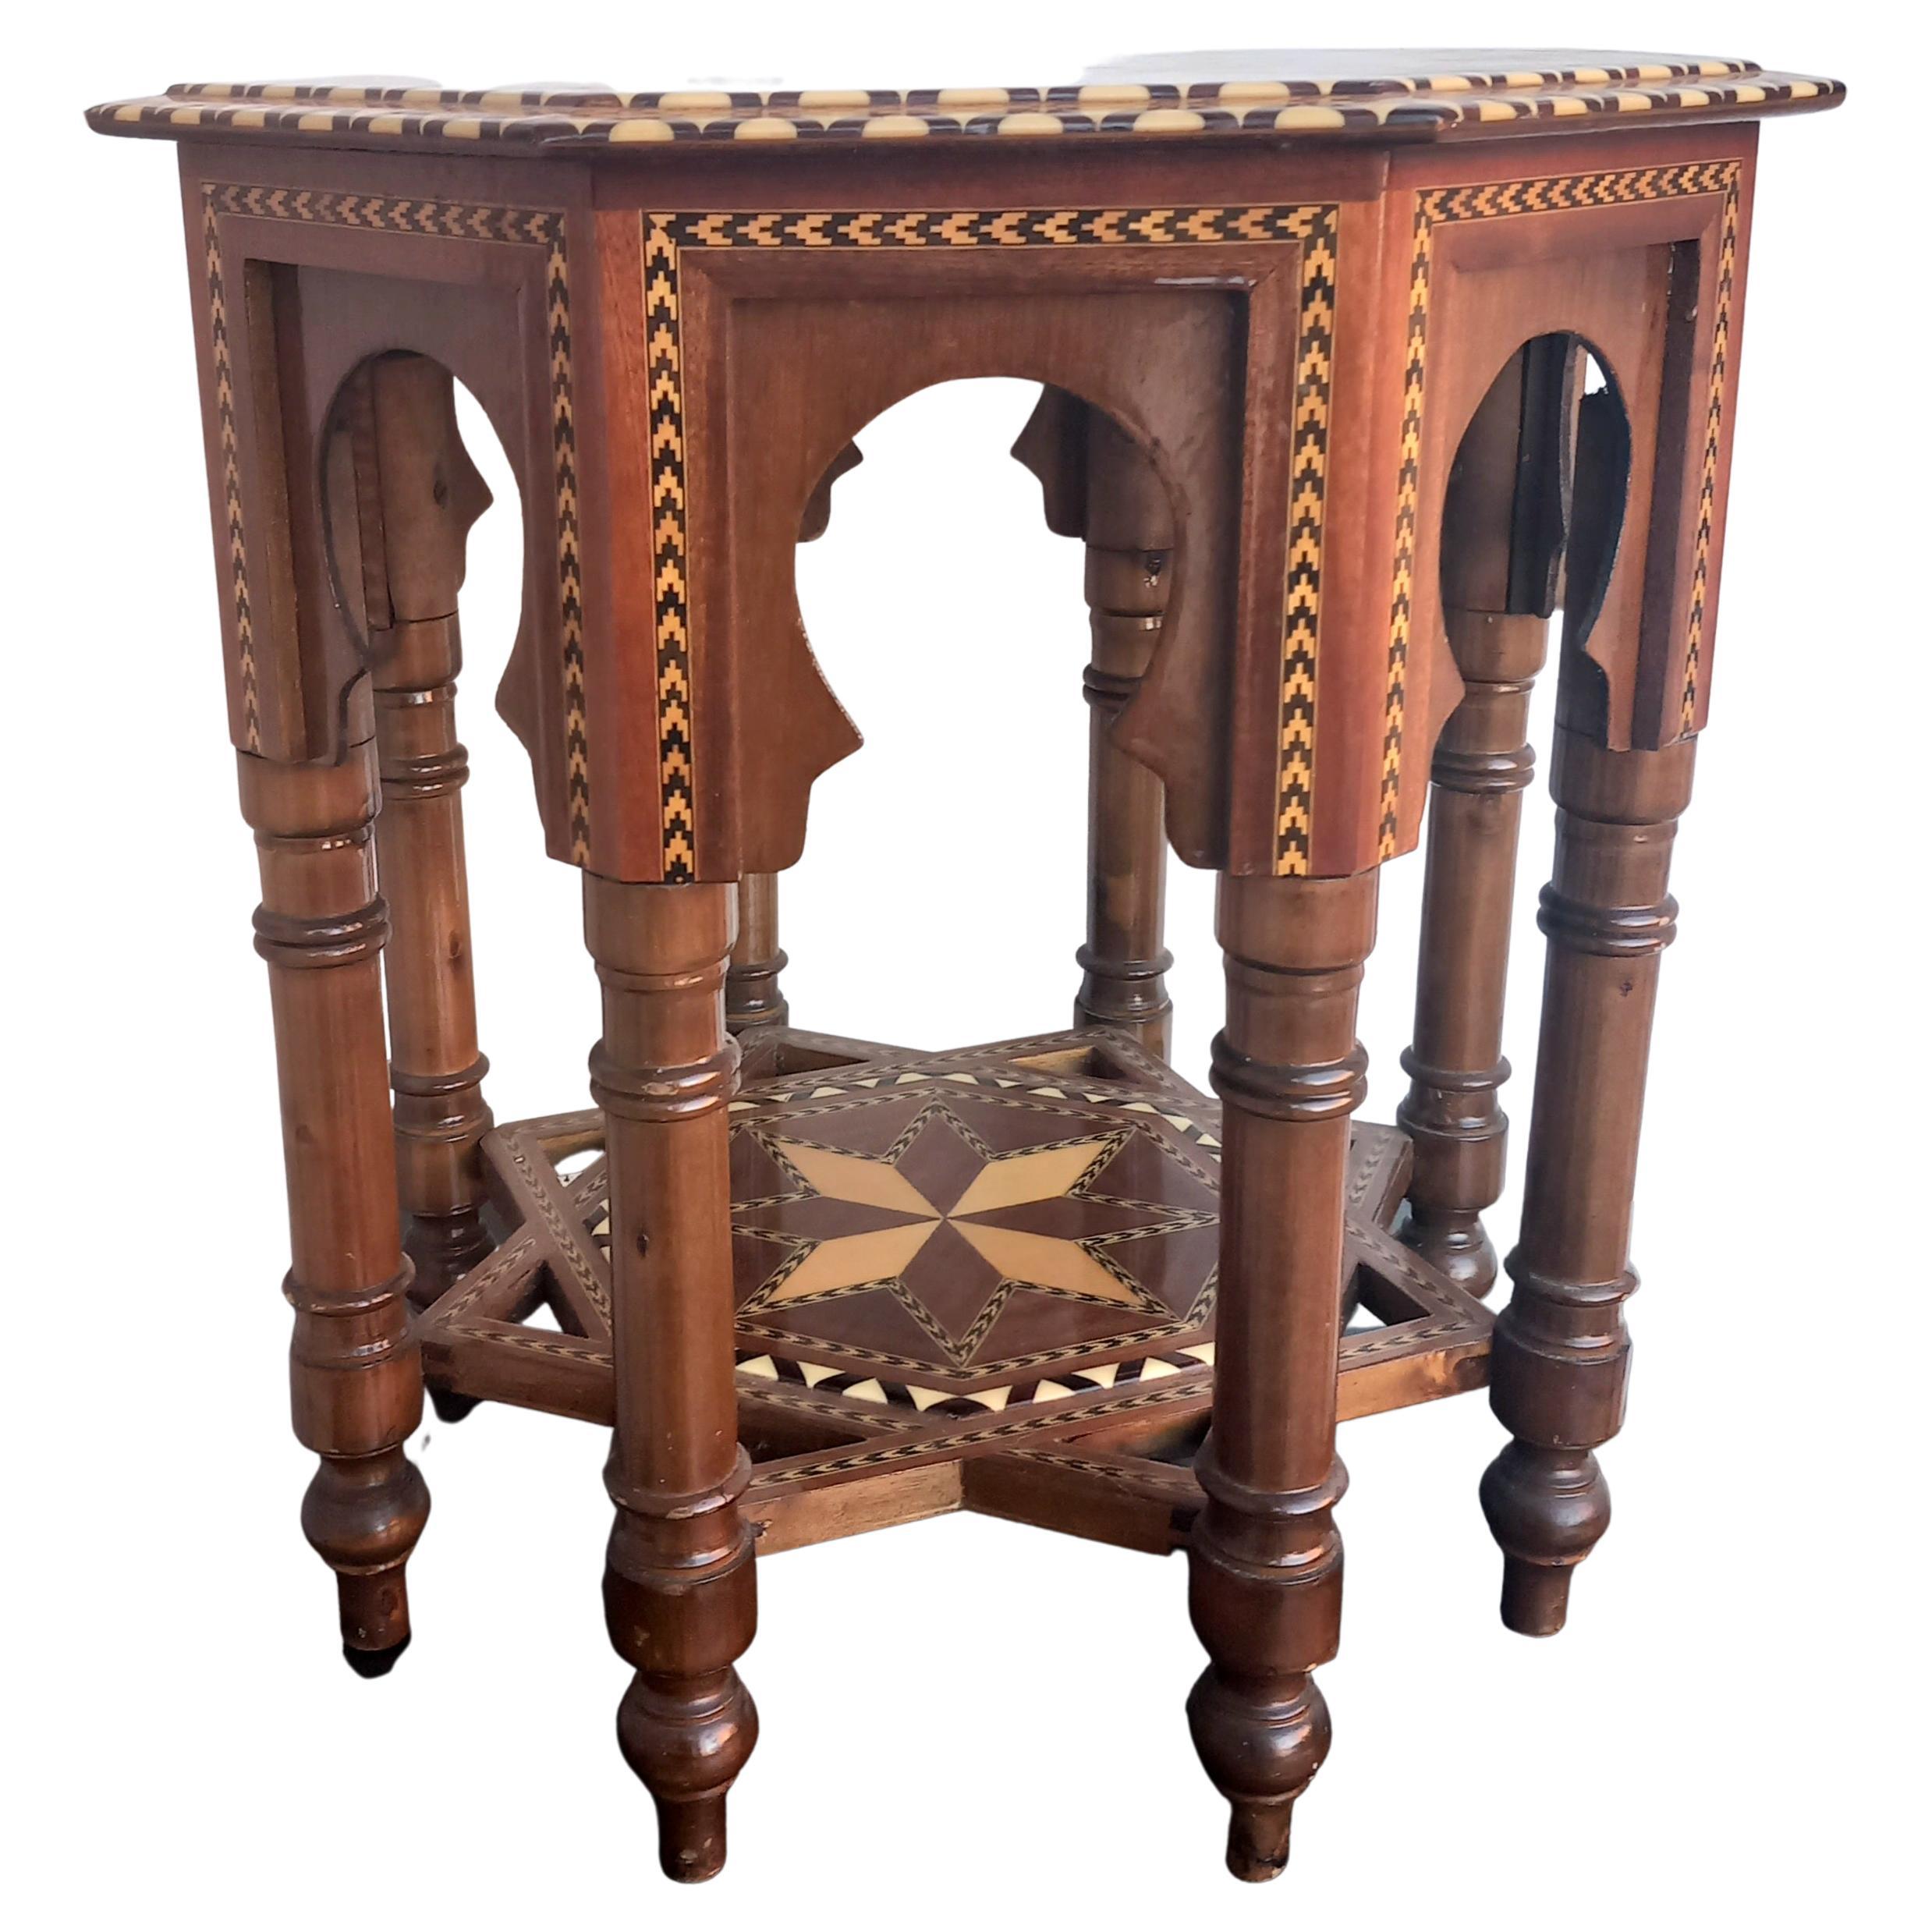 Table with very decorative Moorish inlays from the 20th century in a hexagonal shape
This leads to an arched frieze of temple design. The turned legs are supported by a star embedded in the base.  

These table are in good condition, central star